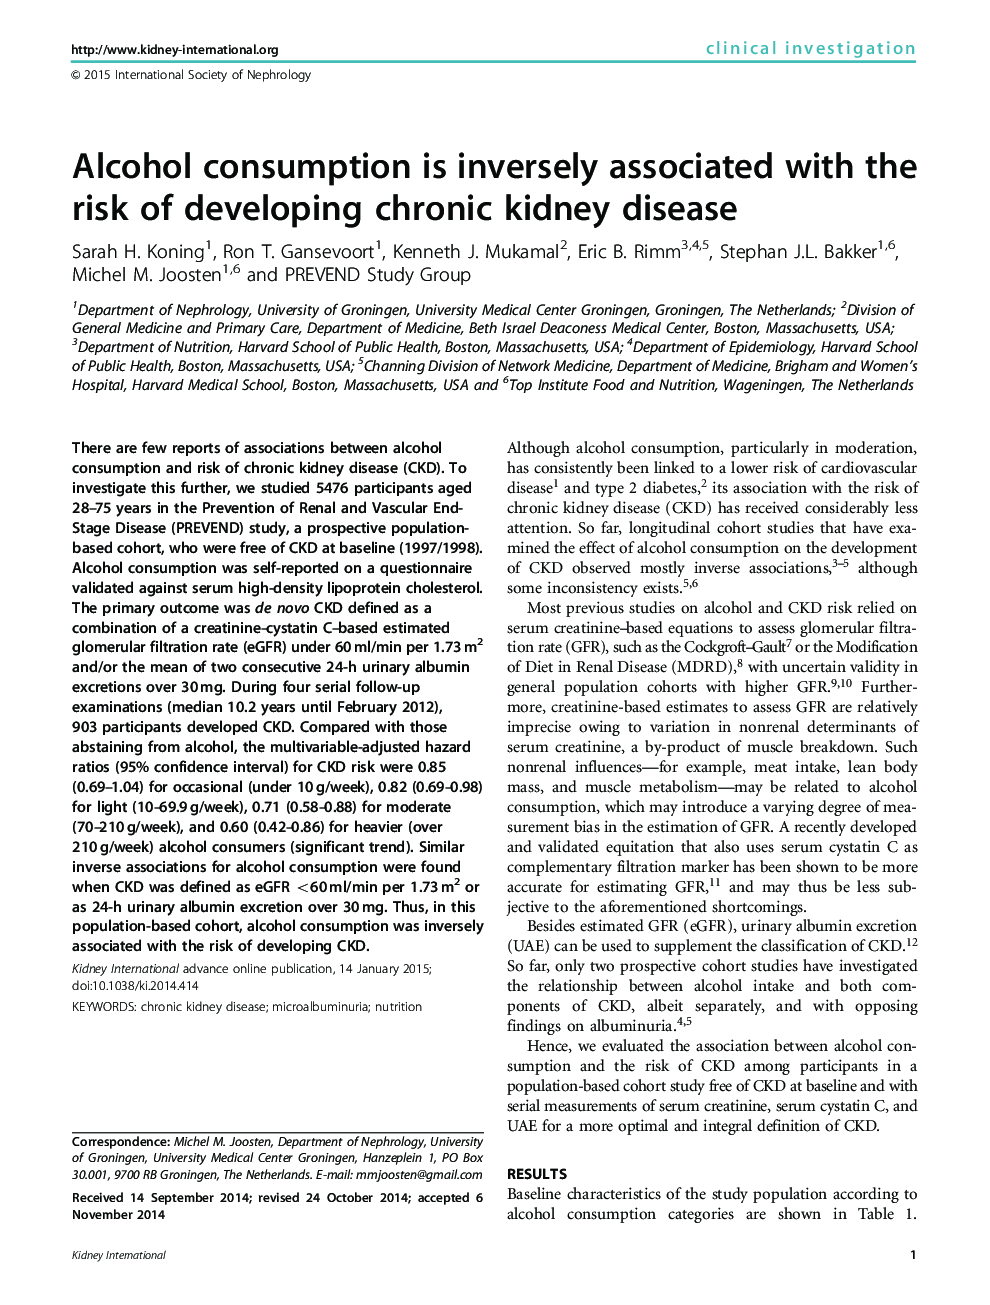 Alcohol consumption is inversely associated with the risk of developing chronic kidney disease